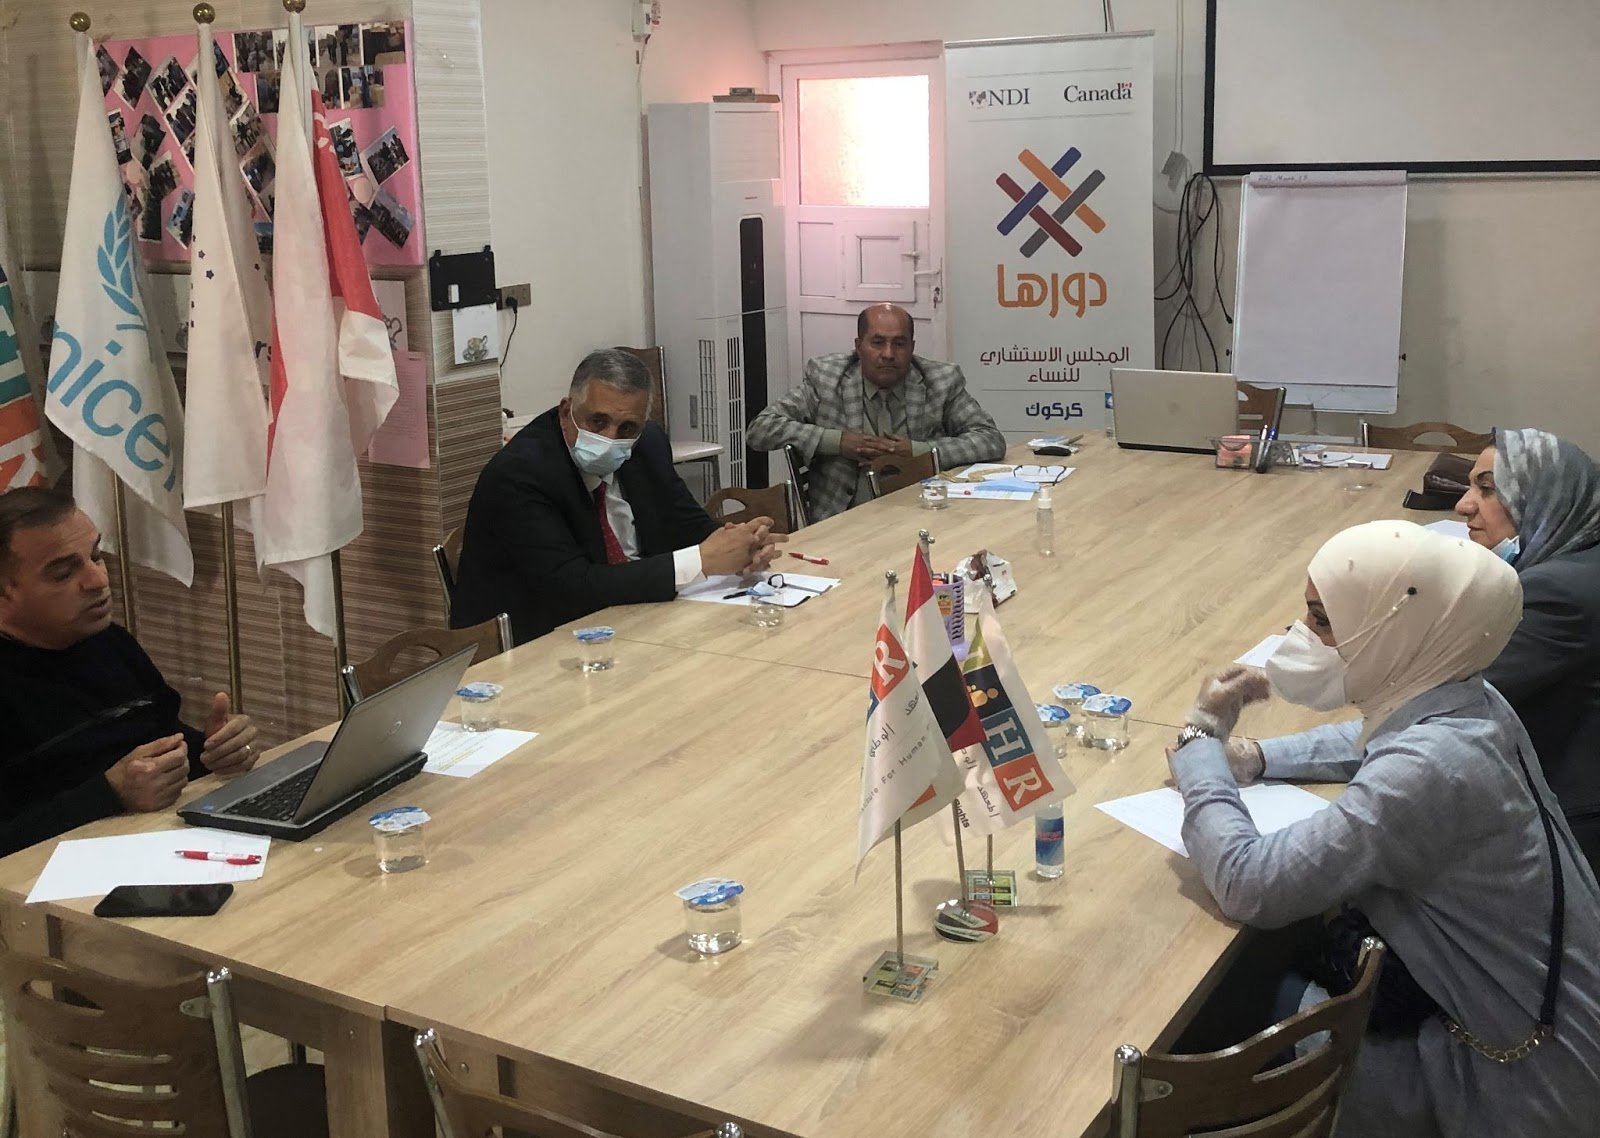 Women's Advisory Boards in Iraq Propose Solutions to Improve Access to Education